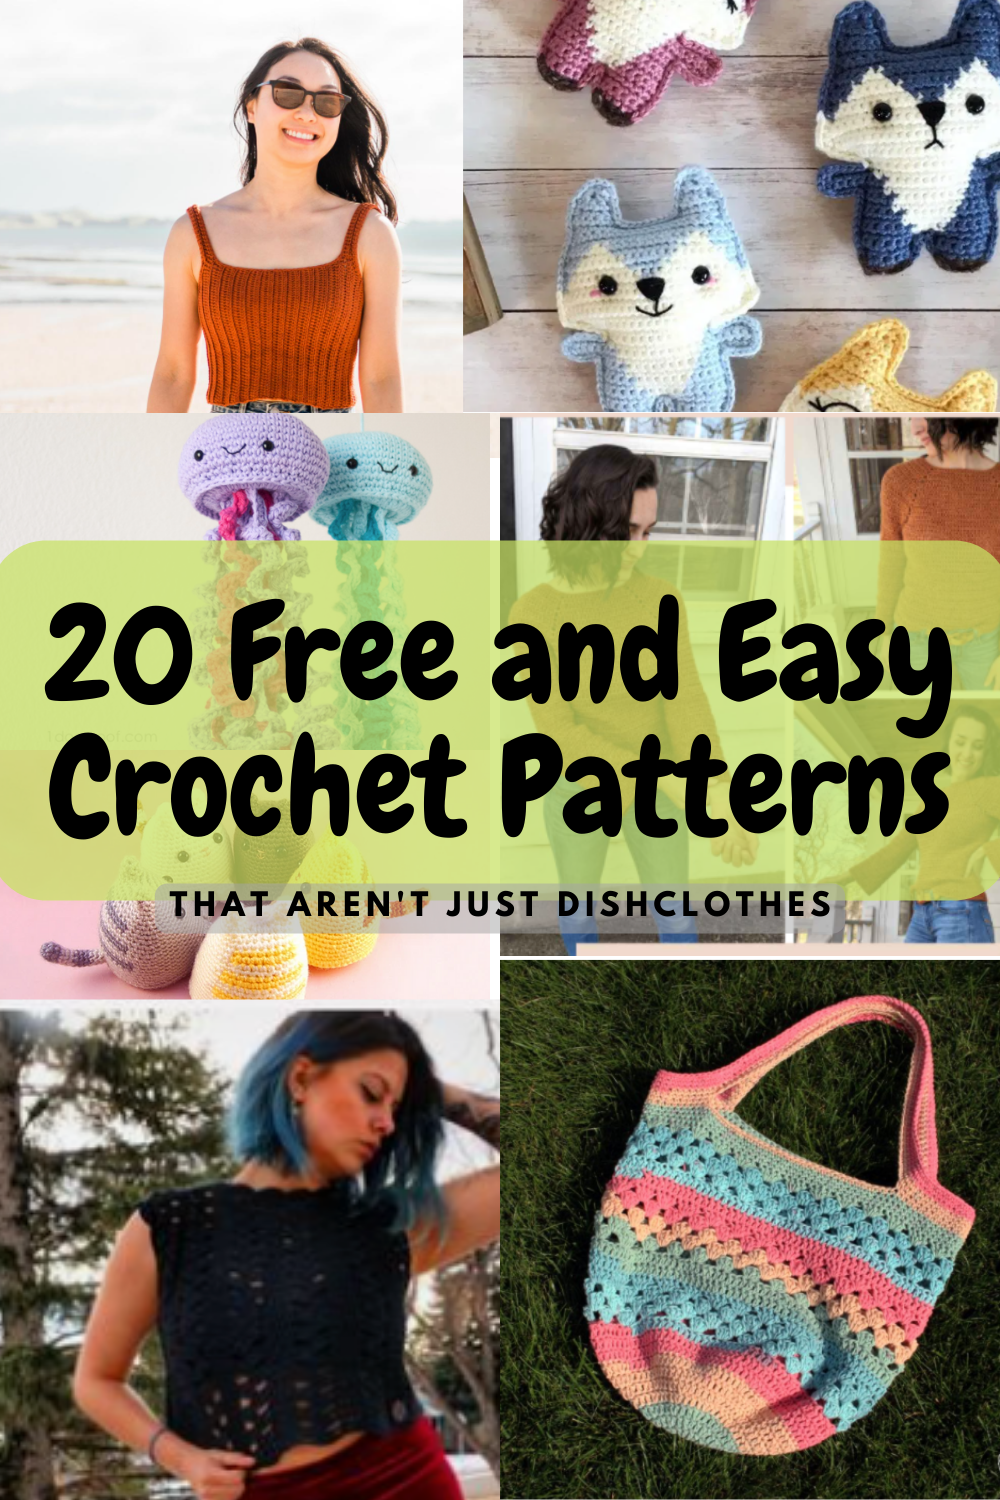 Top 10 Crochet Project To Make In Under An Hour